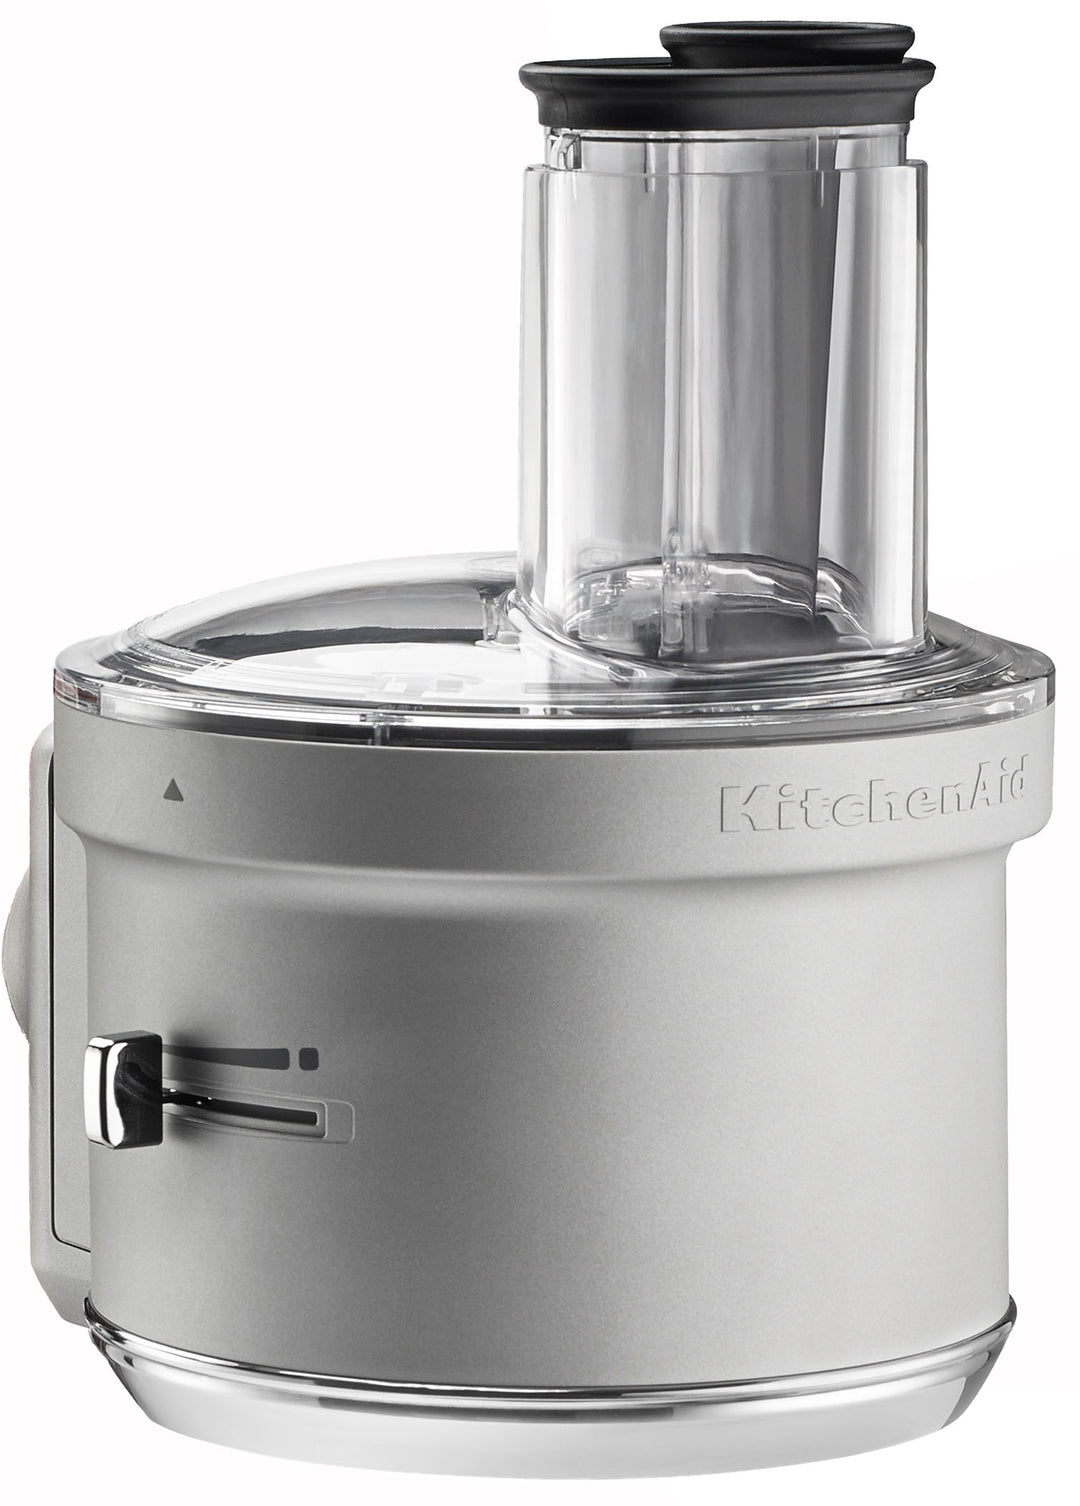 KitchenAid - KSM2FPA Food Processor Attachment Kit with Commercial Style Dicing - Silver_2